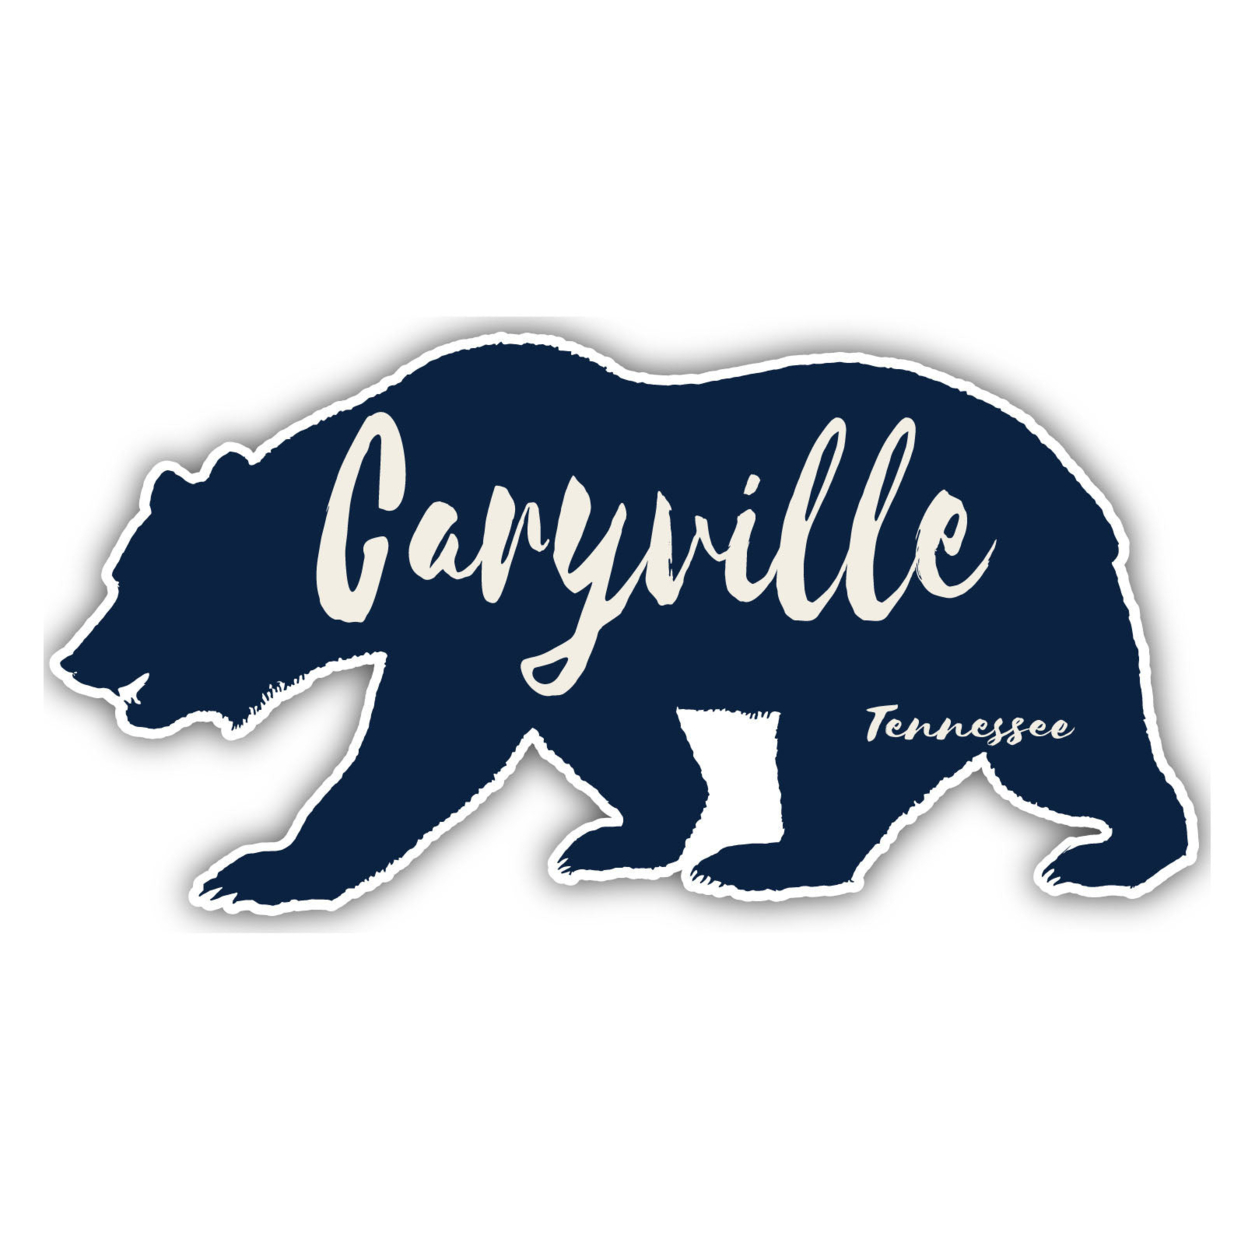 Caryville Tennessee Souvenir Decorative Stickers (Choose Theme And Size) - 4-Pack, 4-Inch, Camp Life